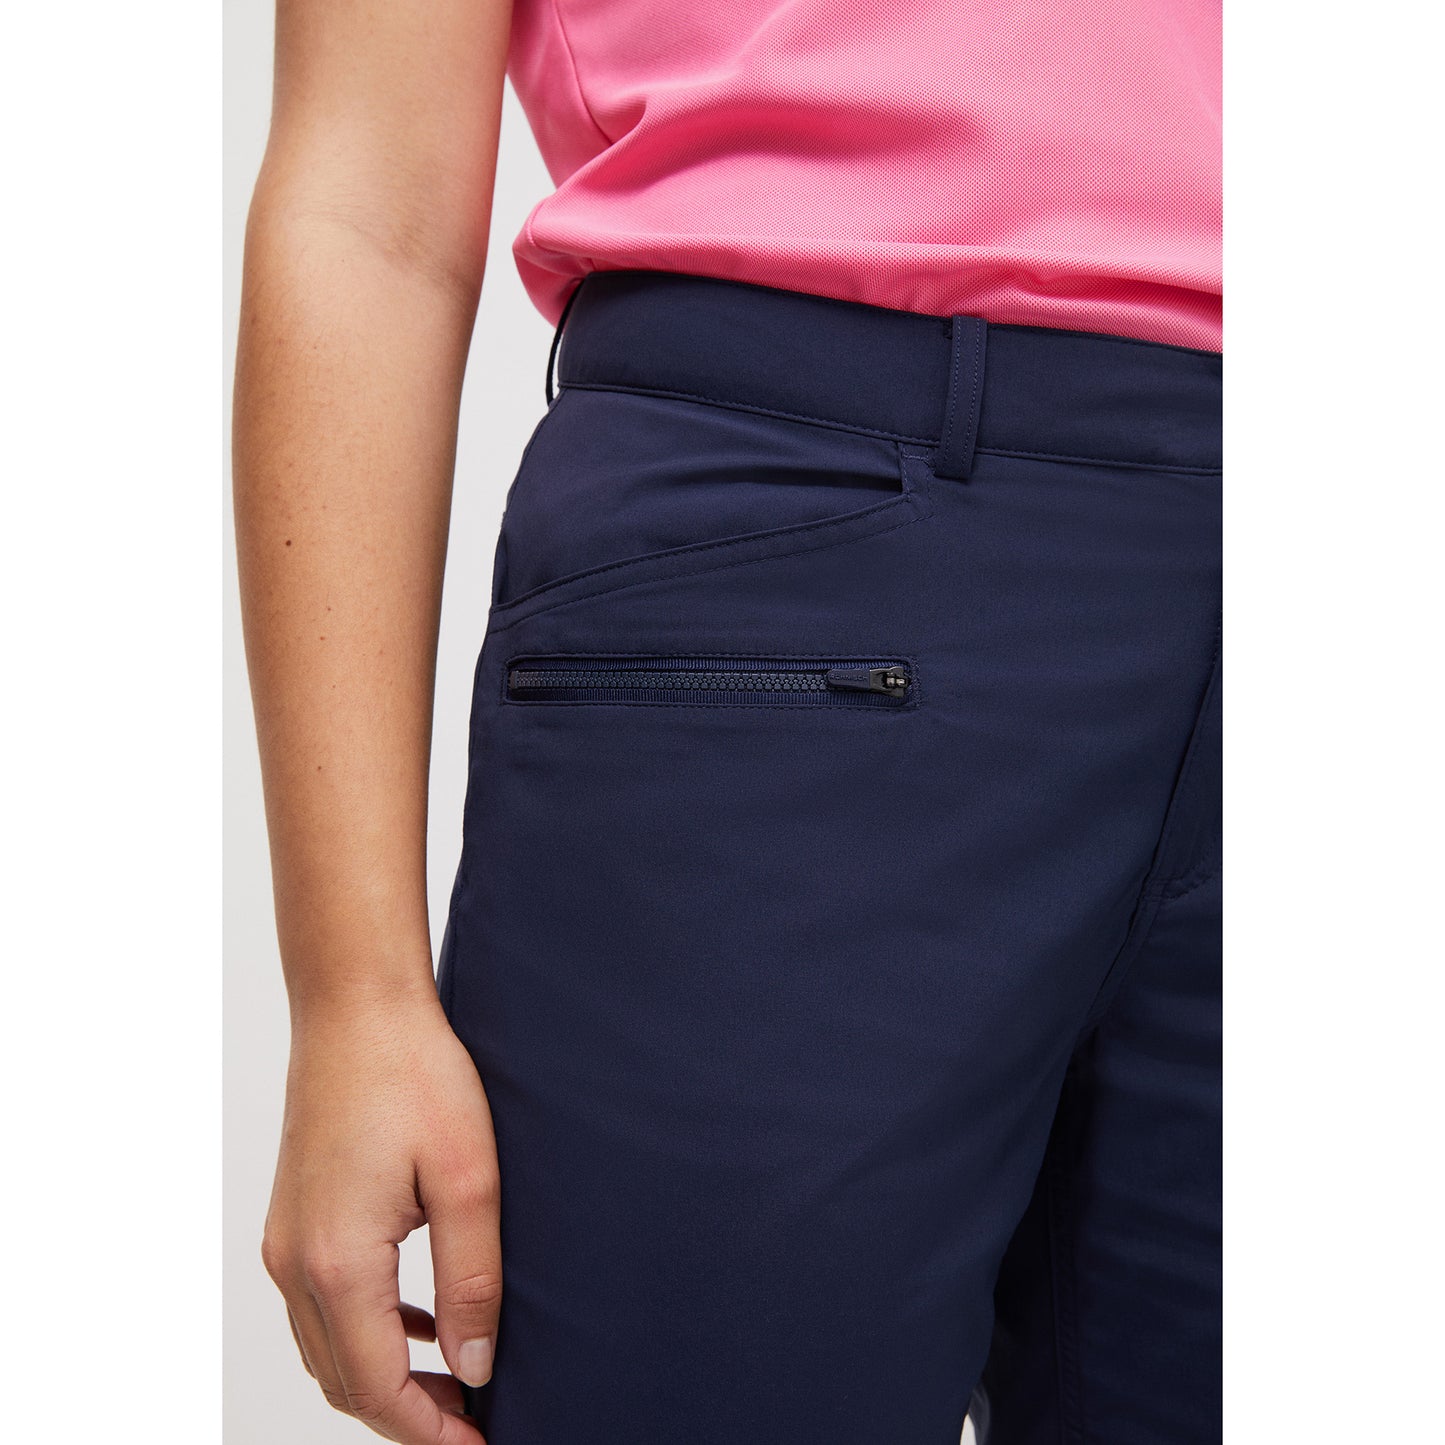 Rohnisch Ladies Navy Bermuda Shorts with Zipped Pocket - Size 8 Only Left